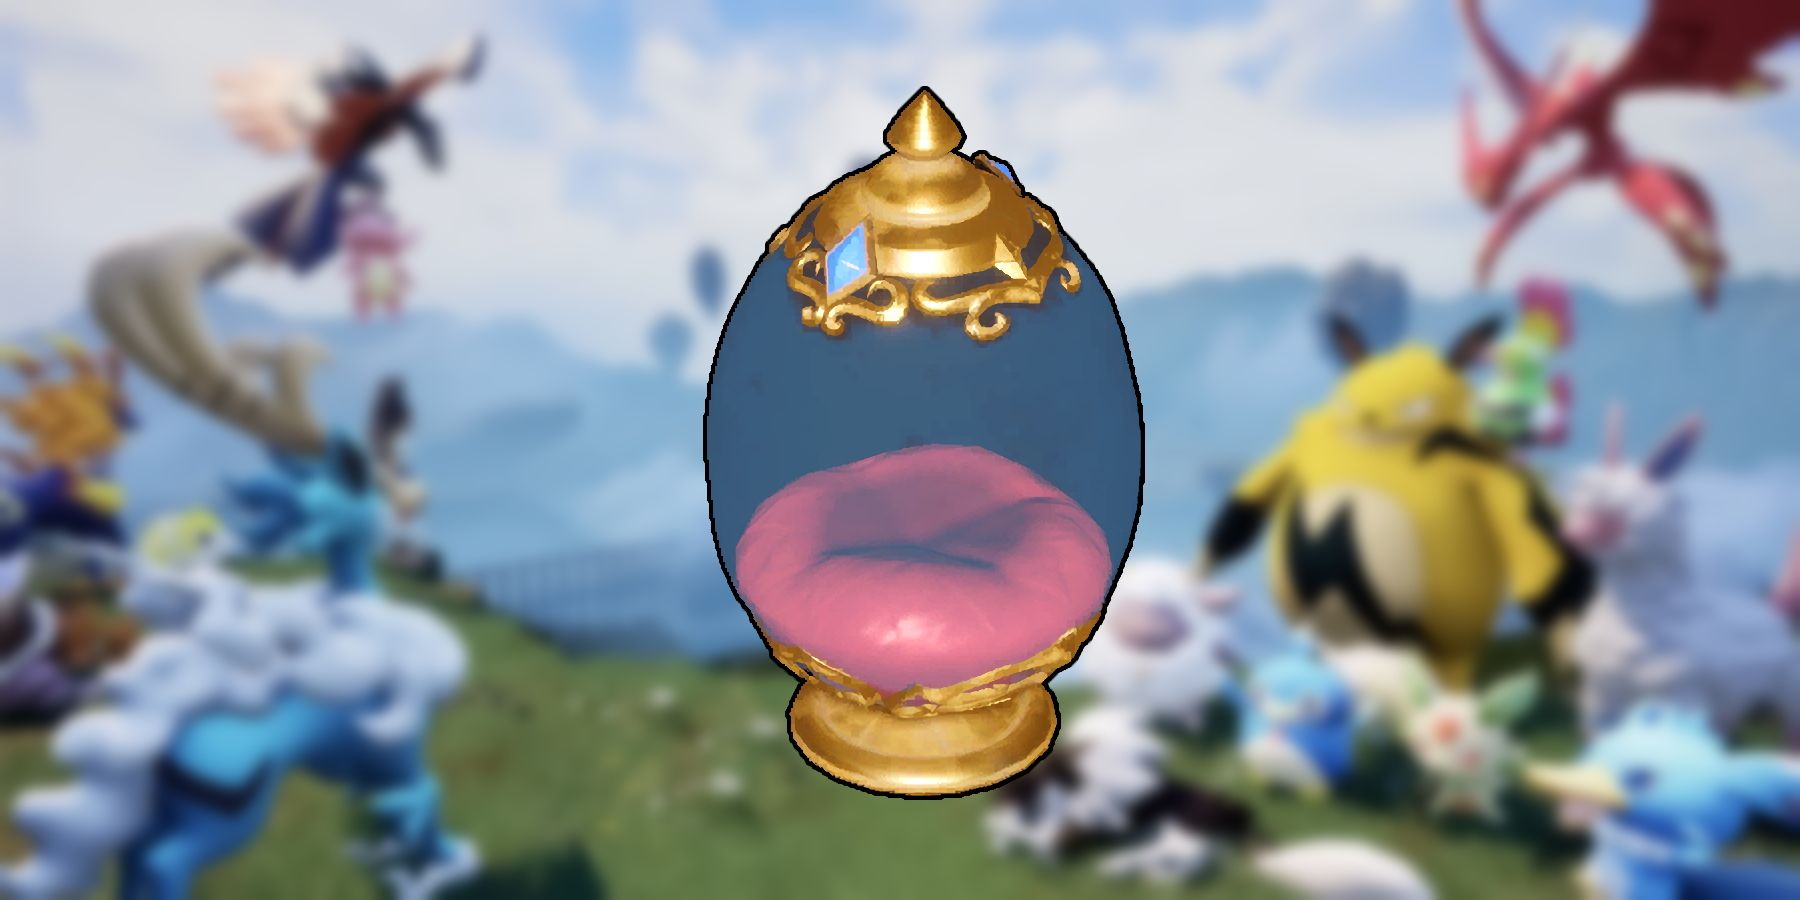 A blurred image of Palworld's key visual with an Egg Incubator on top.